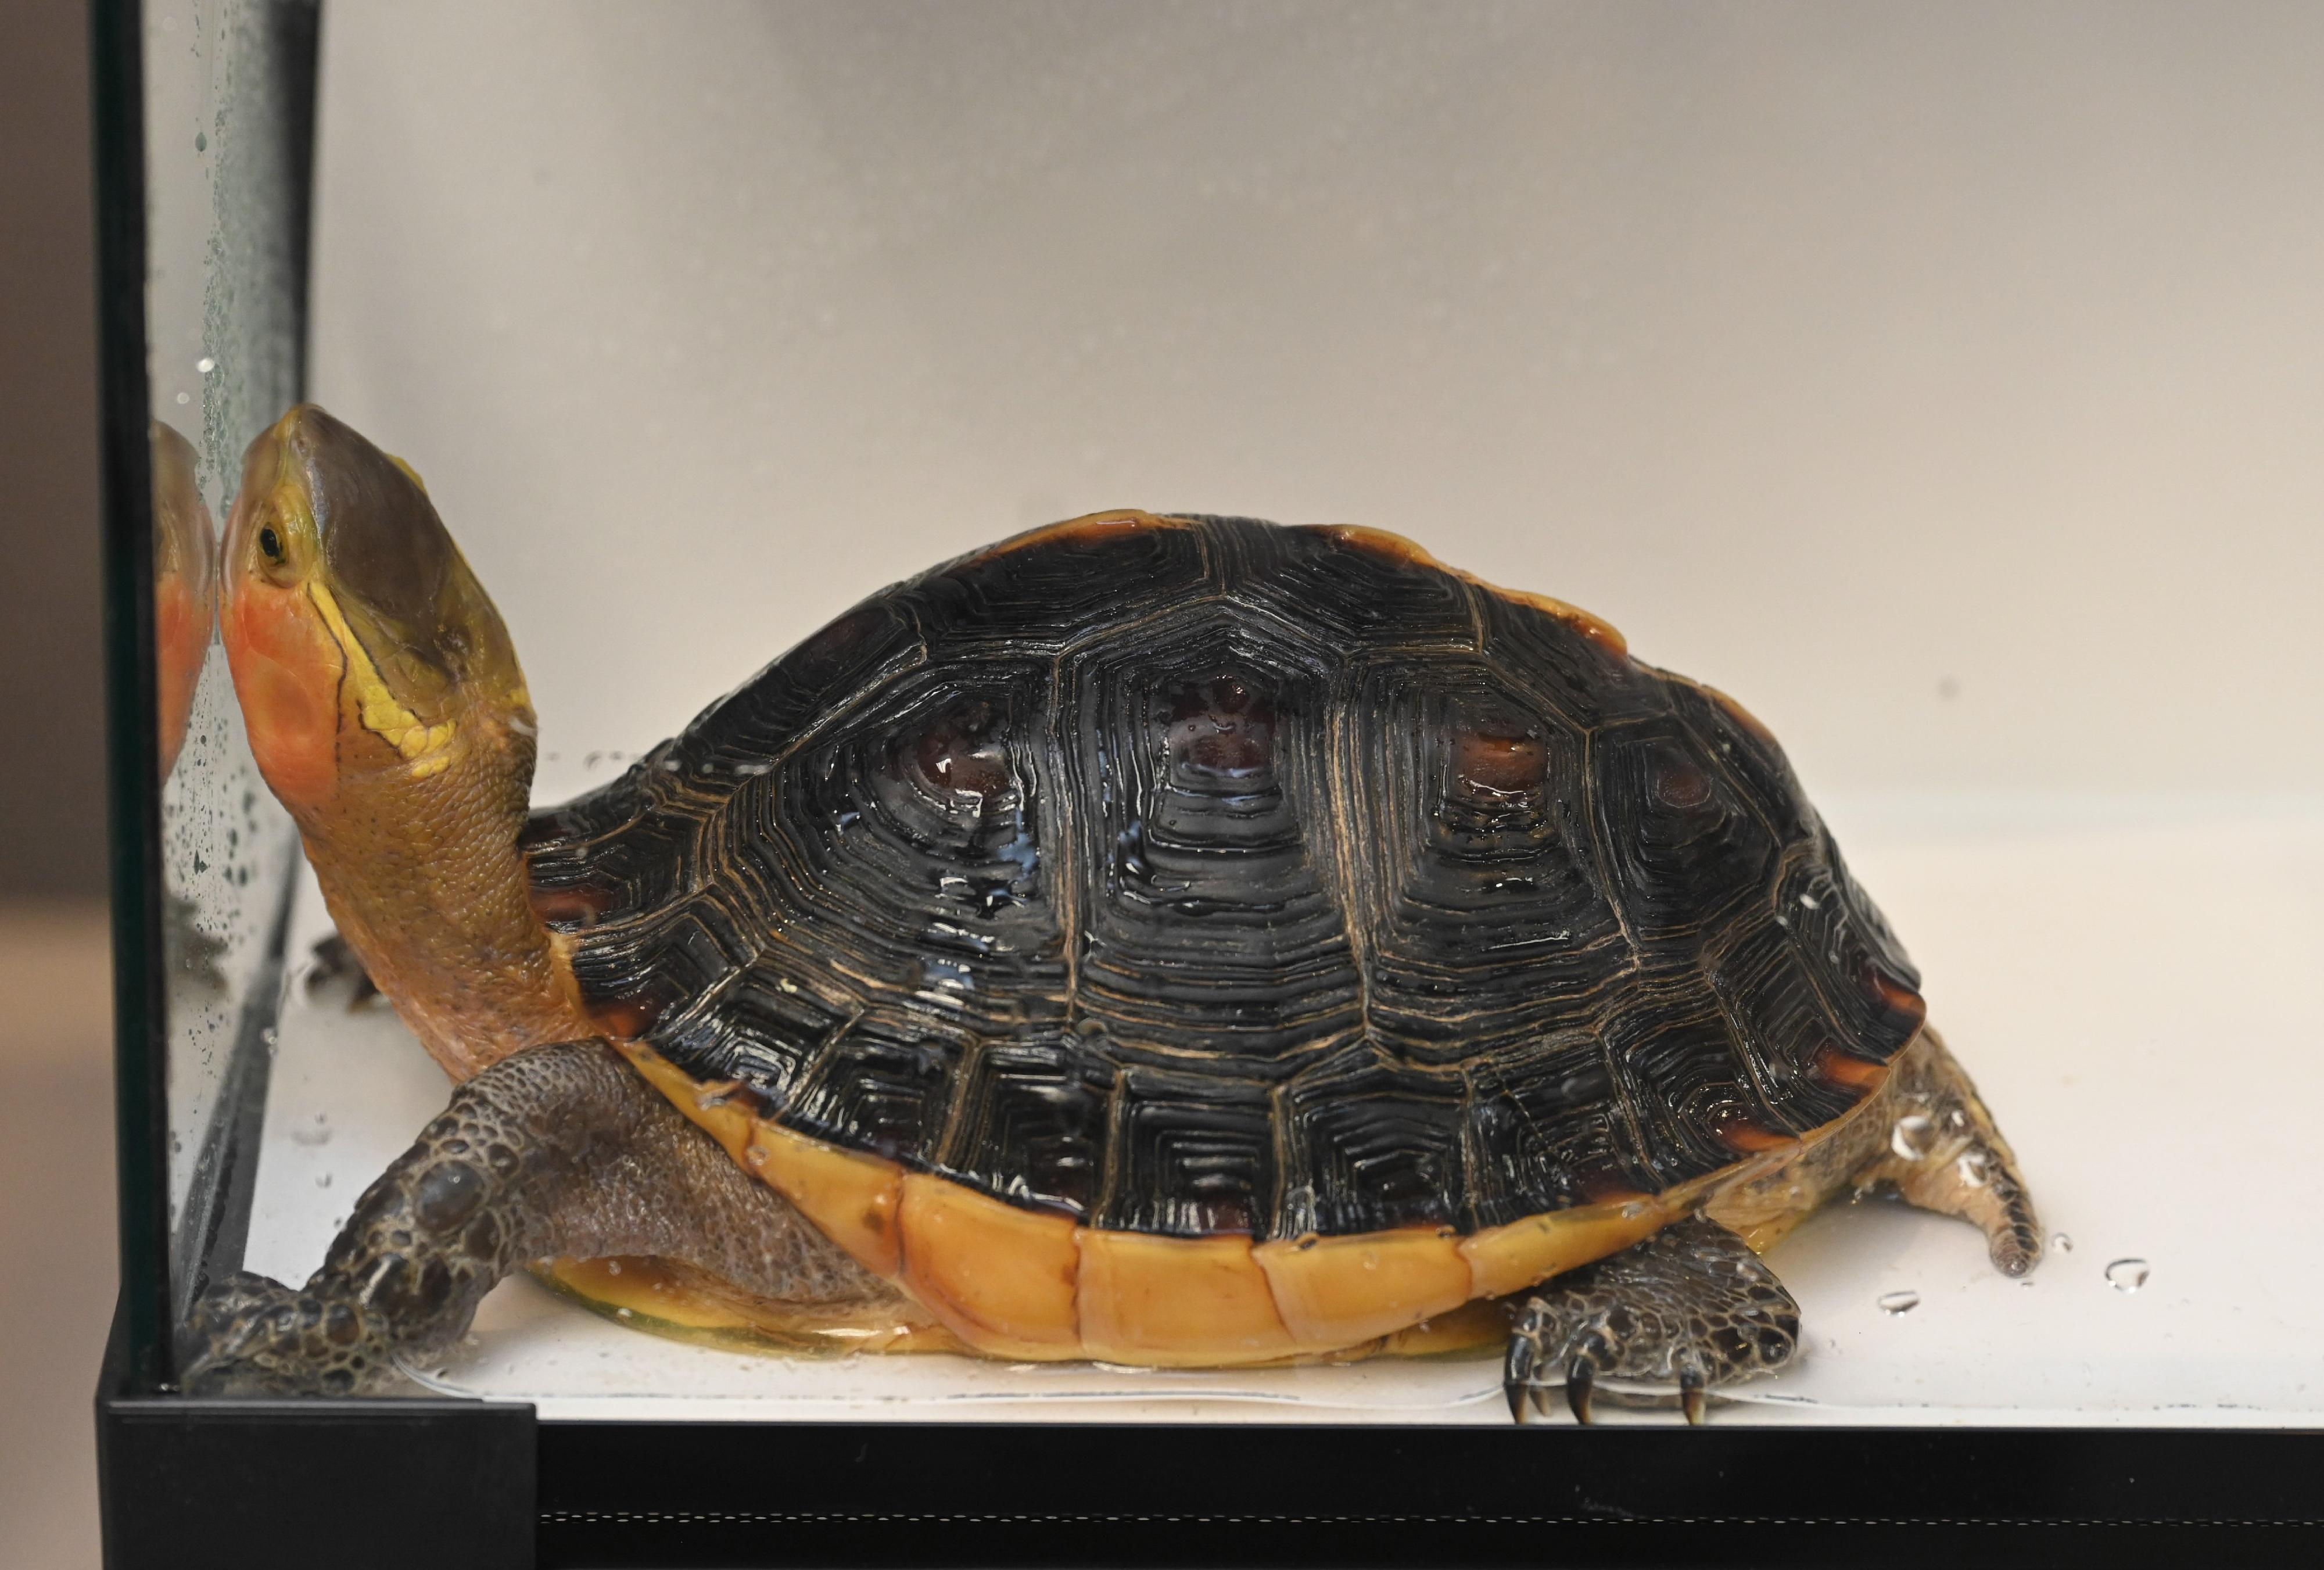 The Agriculture, Fisheries and Conservation Department conducted a joint operation with the Police on July 19. Twenty-nine specimens of endangered turtles, seven suspected turtle eggs and some tools suspected for hunting purposes were seized on some premises in Tai Po and a male suspect was arrested. Photo shows one of the seized yellow-margined box turtles (Cuora flavomarginata).